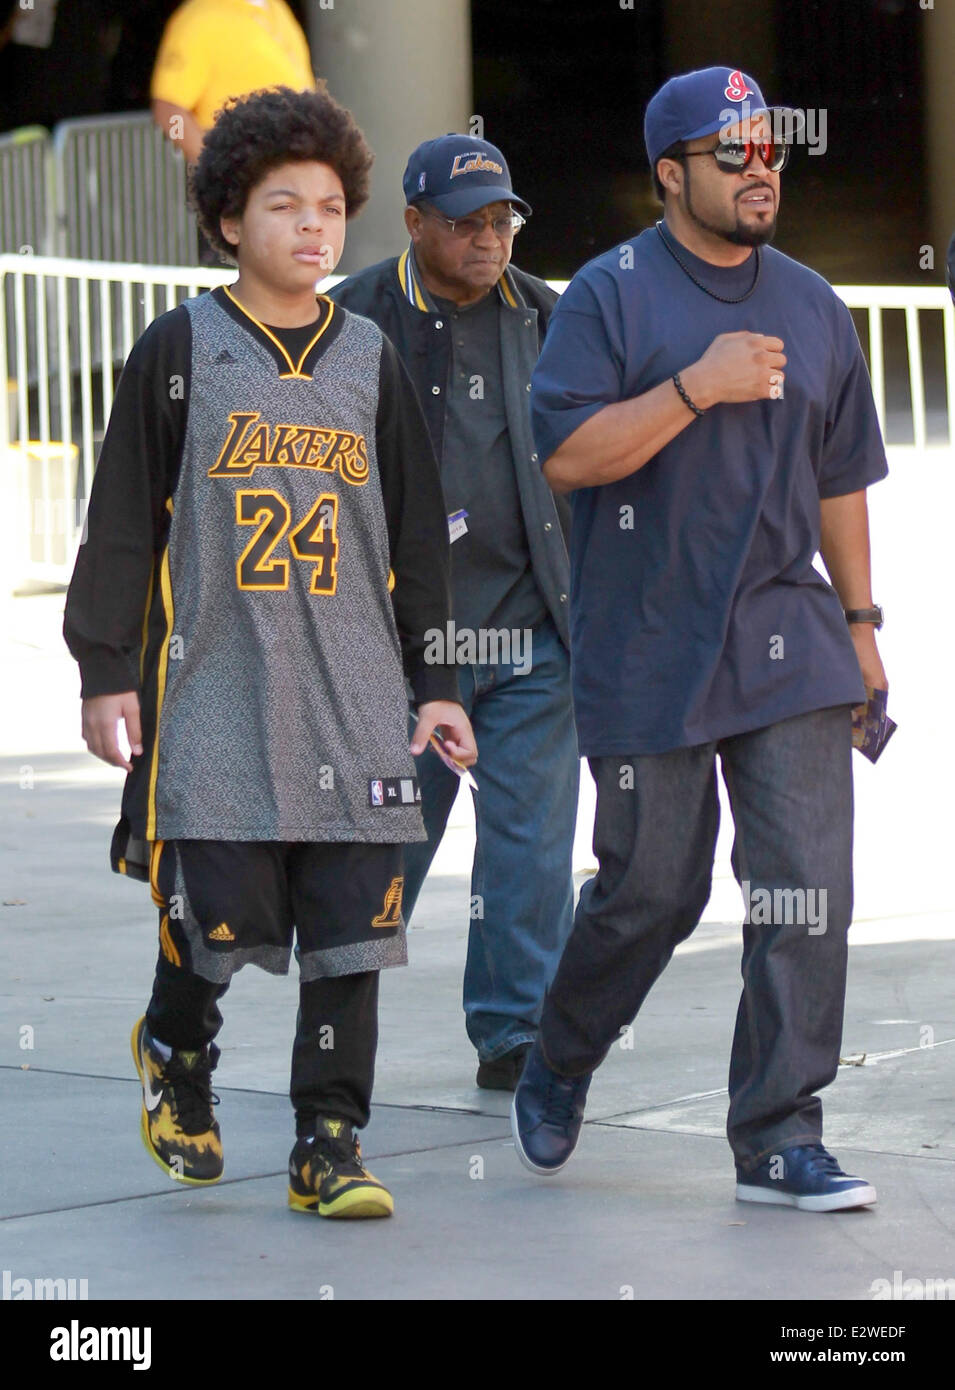 Celebrities arrive at the Staples Center to watch the Los Angeles Lakers  vs. Chicago Bulls basketball game. Lakers won 81 - 90 Featuring: Ice Cube,Shareef  Jackson Where: Los Angeles, California, United States